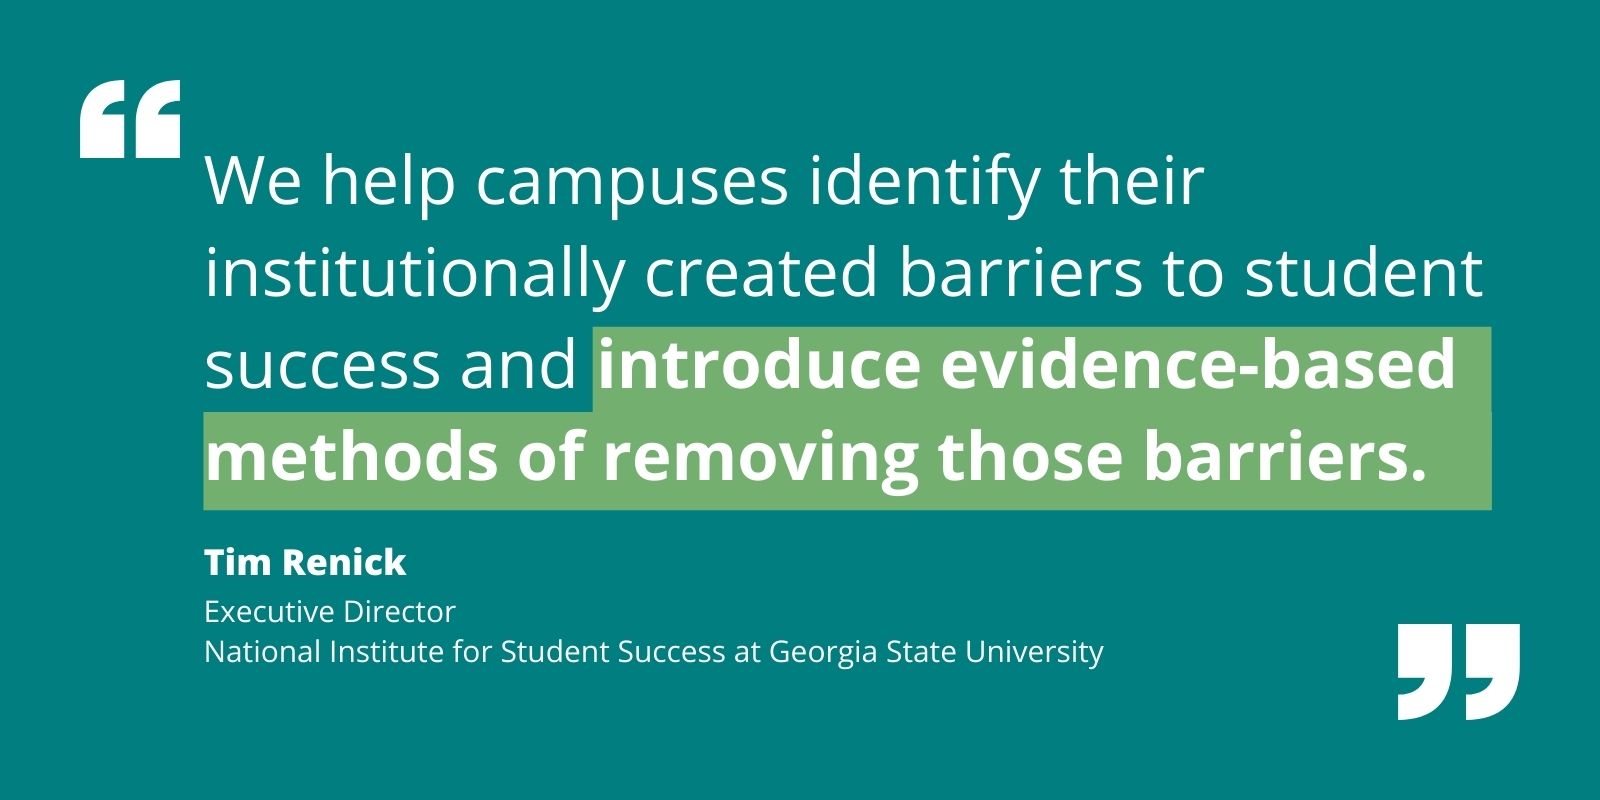 Quote by Tim Renick re helping campuses identify and remove institutionally created barriers to student success.